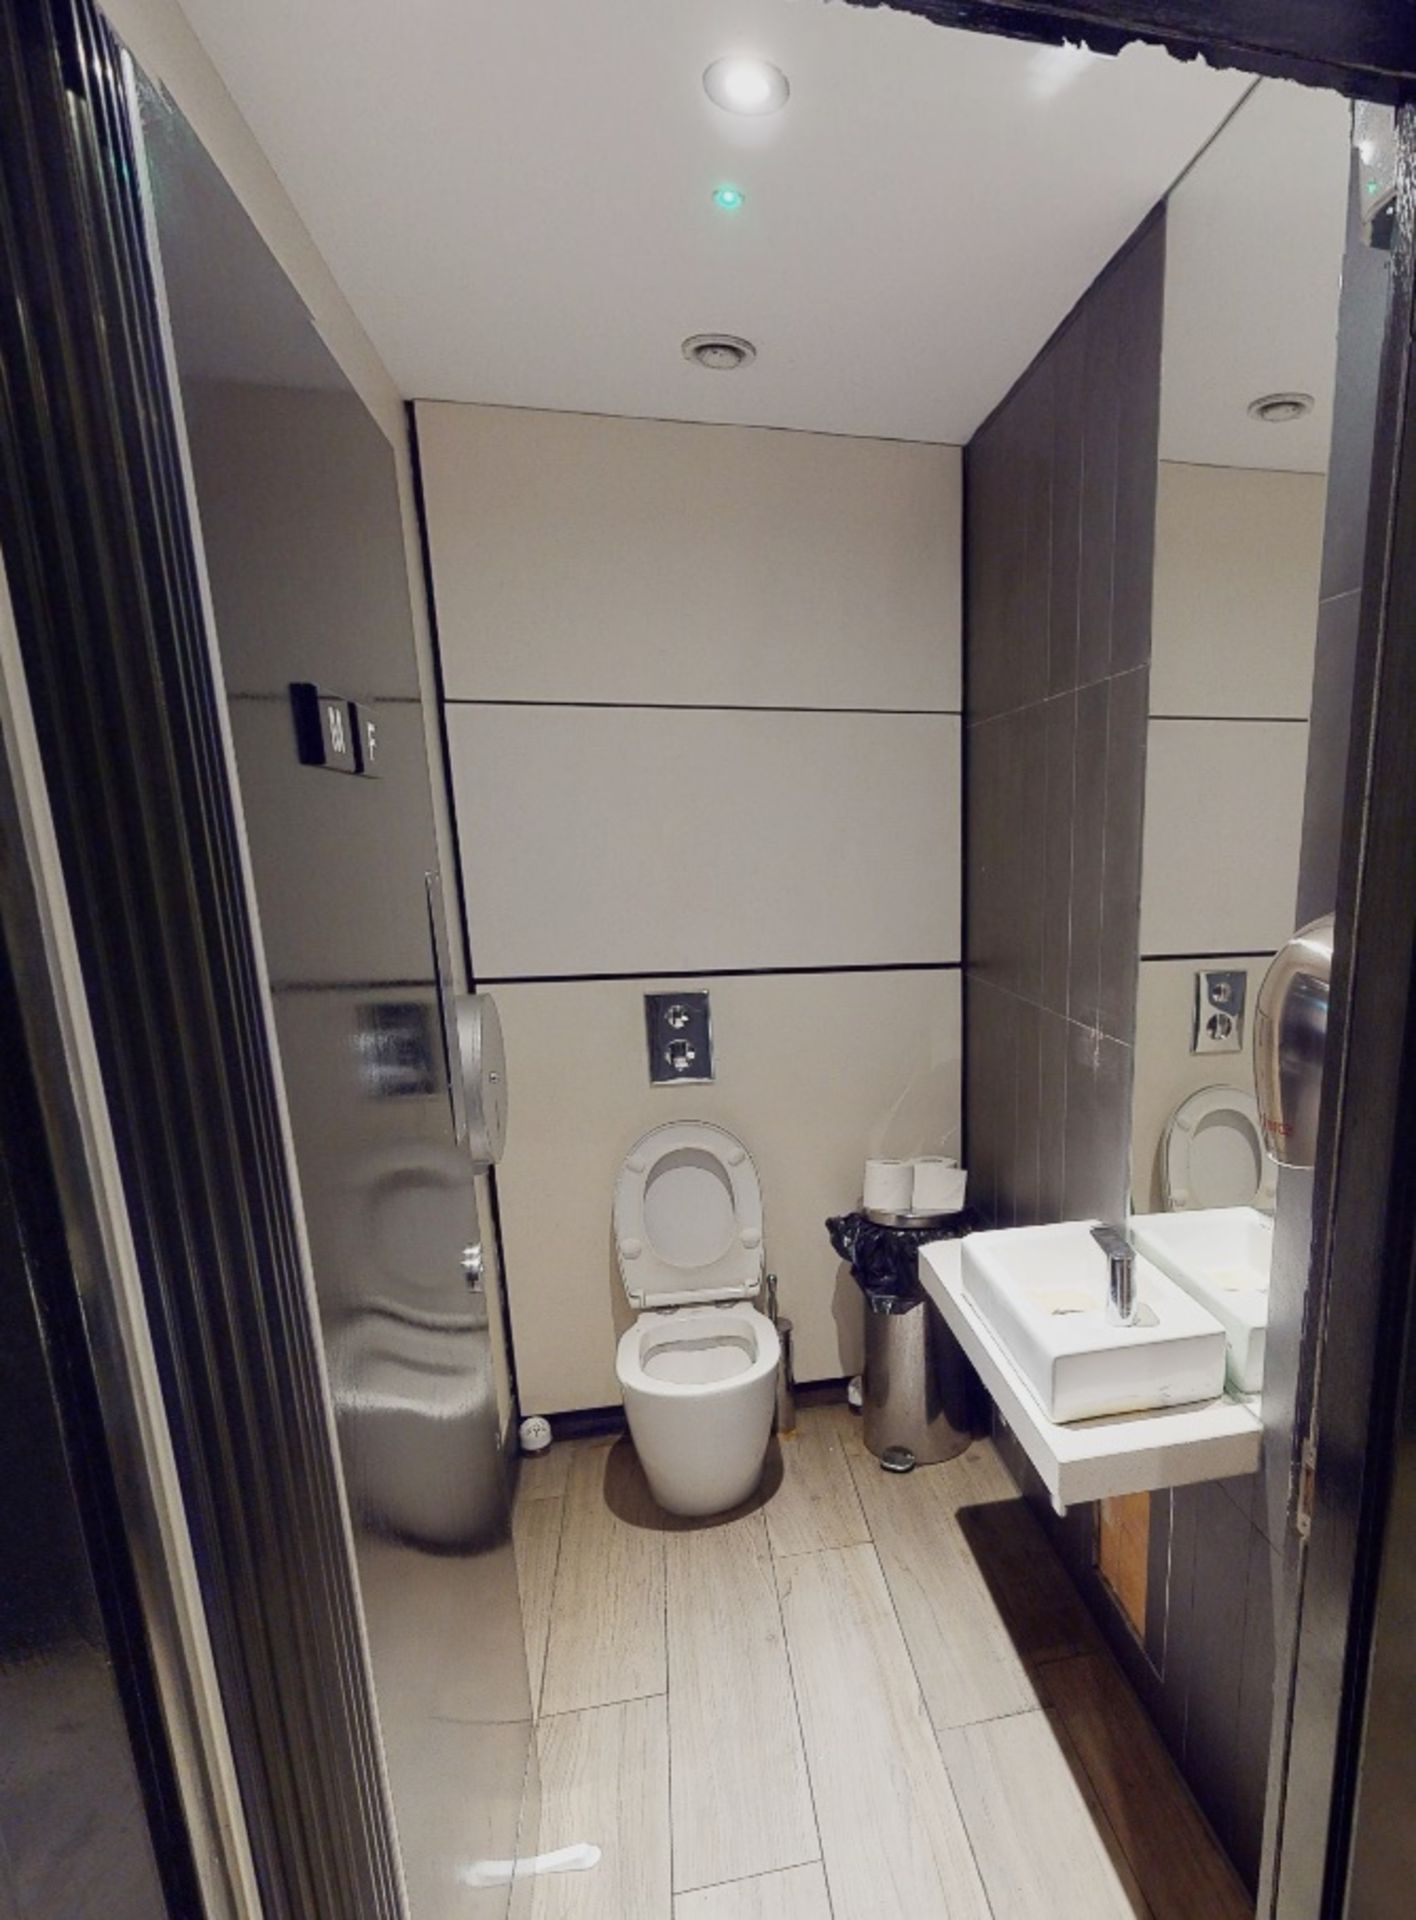 1 x Toilet Suite - Includes Back to Wall Toilet, Floating Hand Wash Basin With Mixer Tap, Pedal Bin, - Image 2 of 2